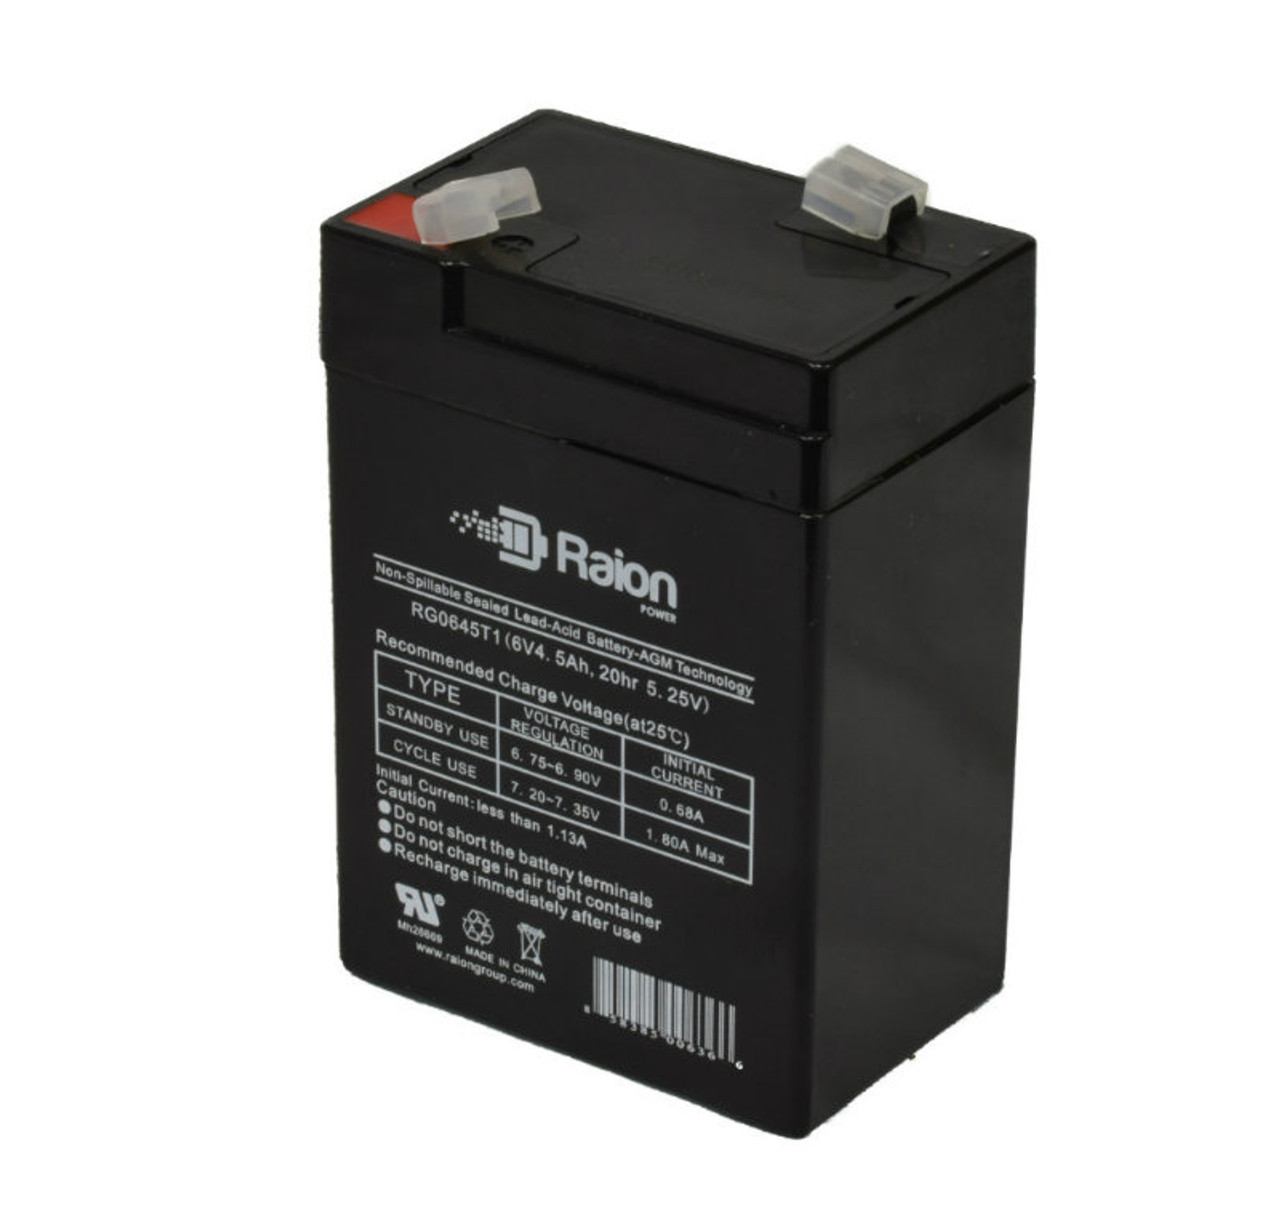 Raion Power RG0645T1 6V 4.5Ah Replacement Battery Cartridge for ELS ELS EDS640W